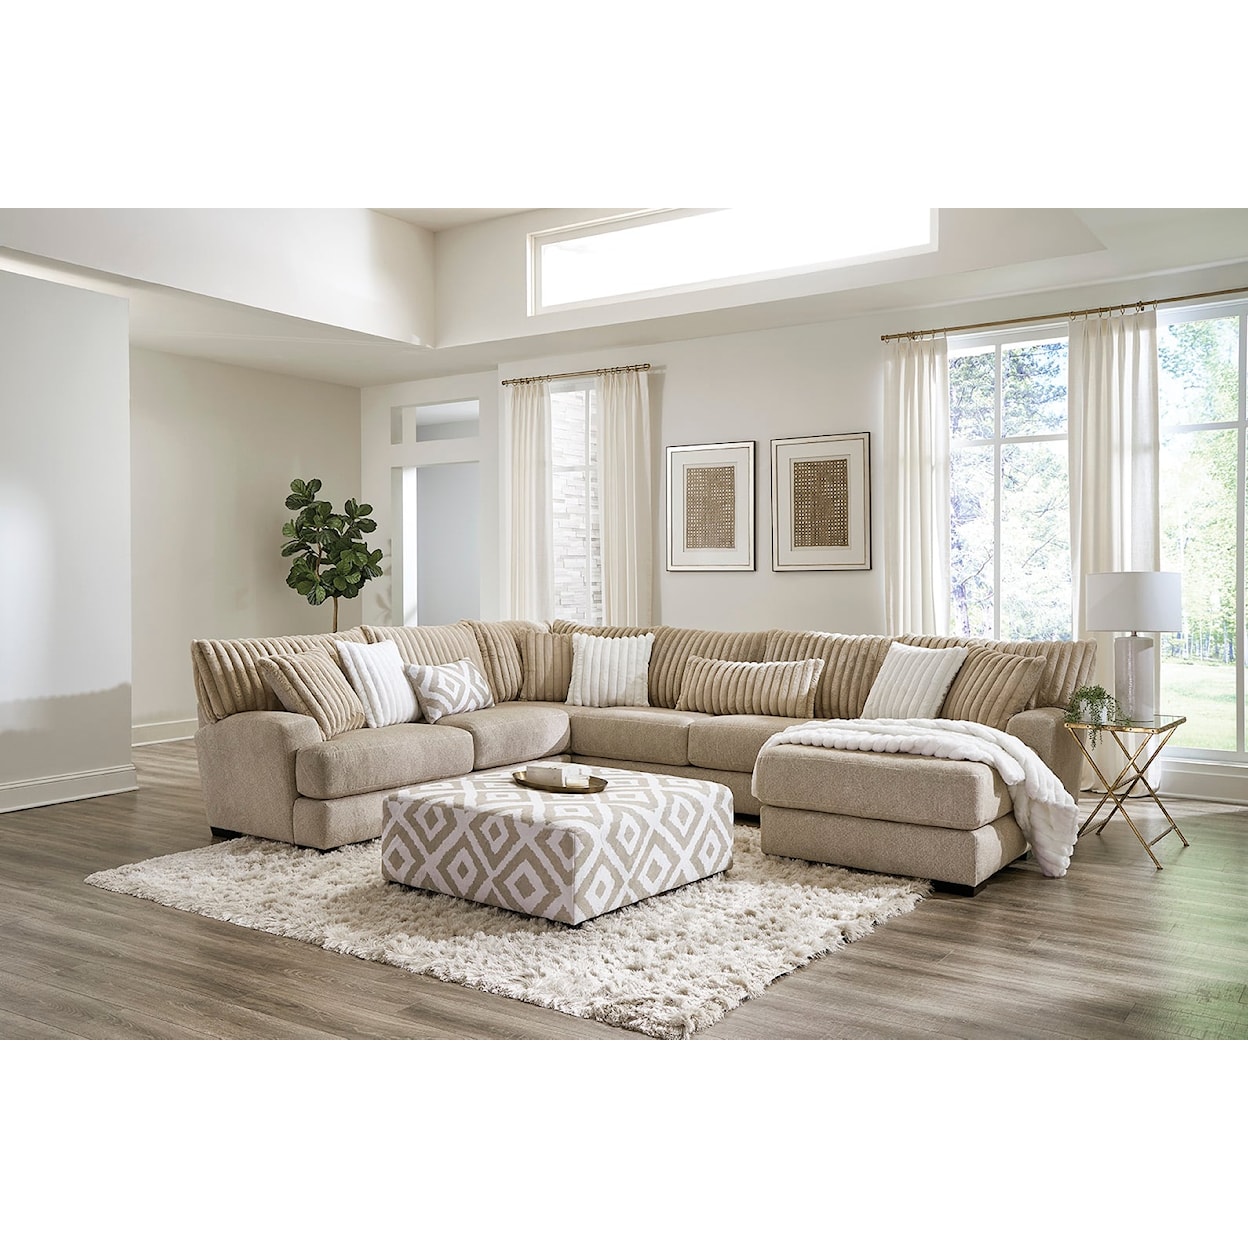 Albany Clarissa CLARISSA TOAST 3 PIECE SECTIONAL. | WITH RAF